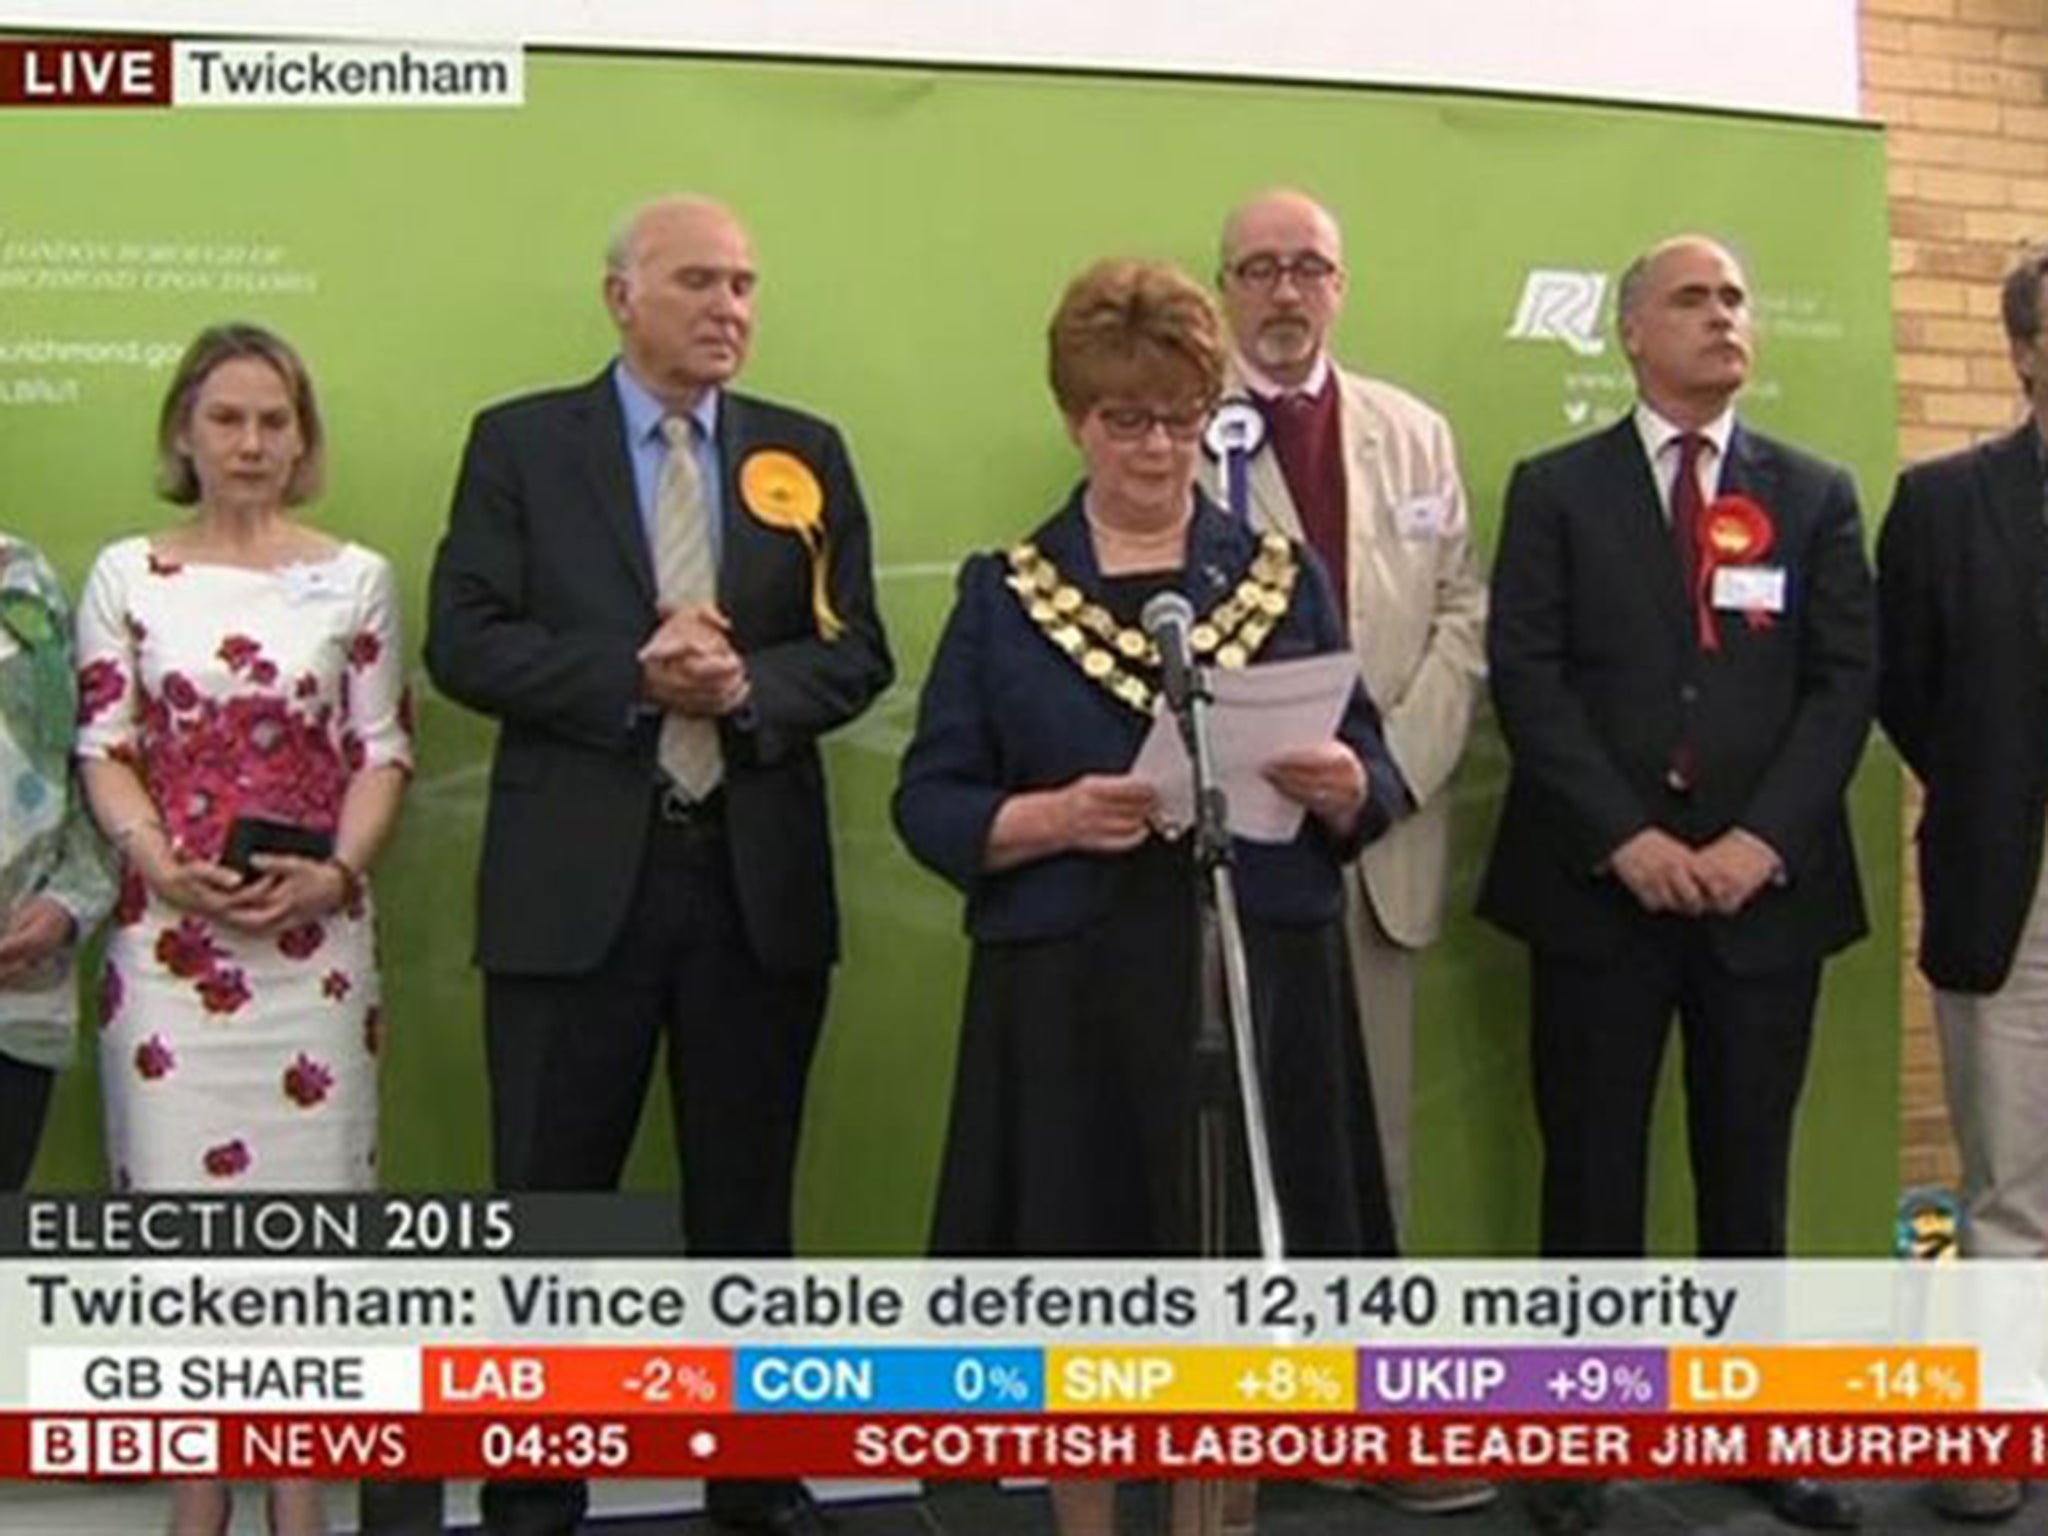 Vince Cable lost his seat on 12 per cent swing to the Tories